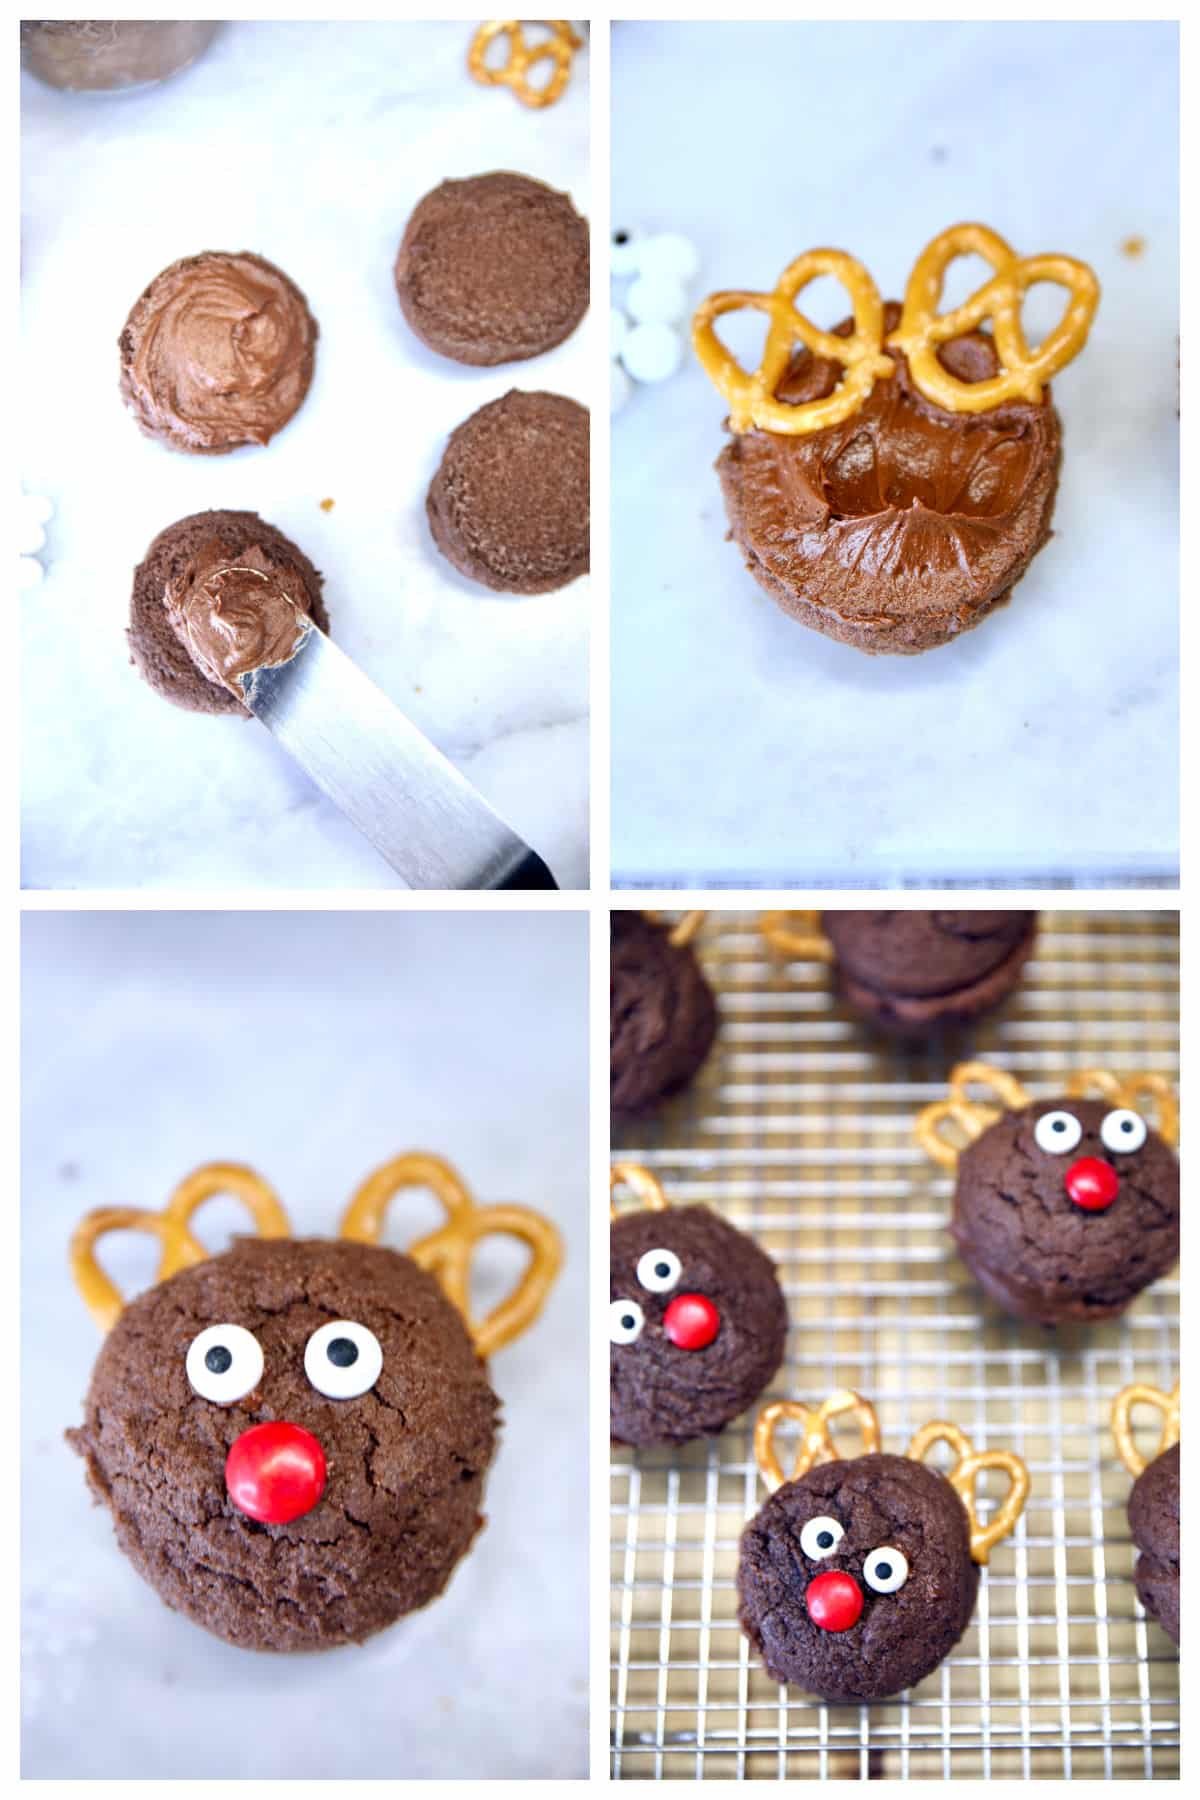 Collage: making chocolate sandwich cookies with reindeer decorations.